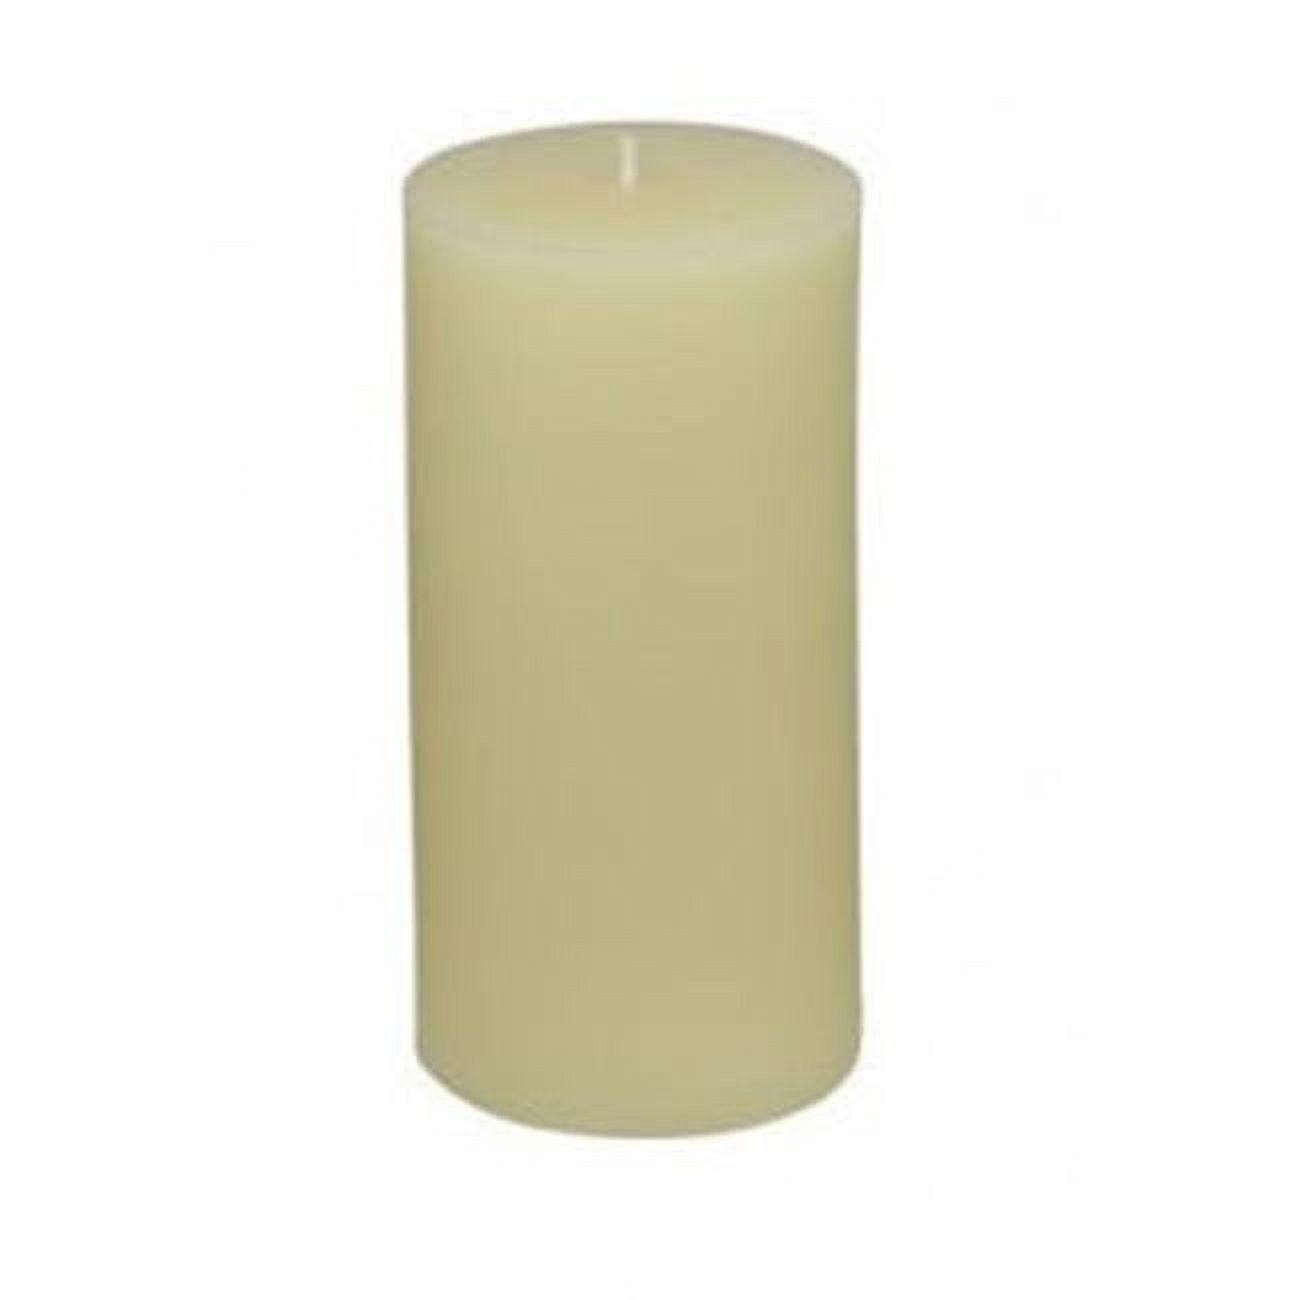 Classic Ivory Unscented Pillar Candles, Set of 12, 3" x 6"